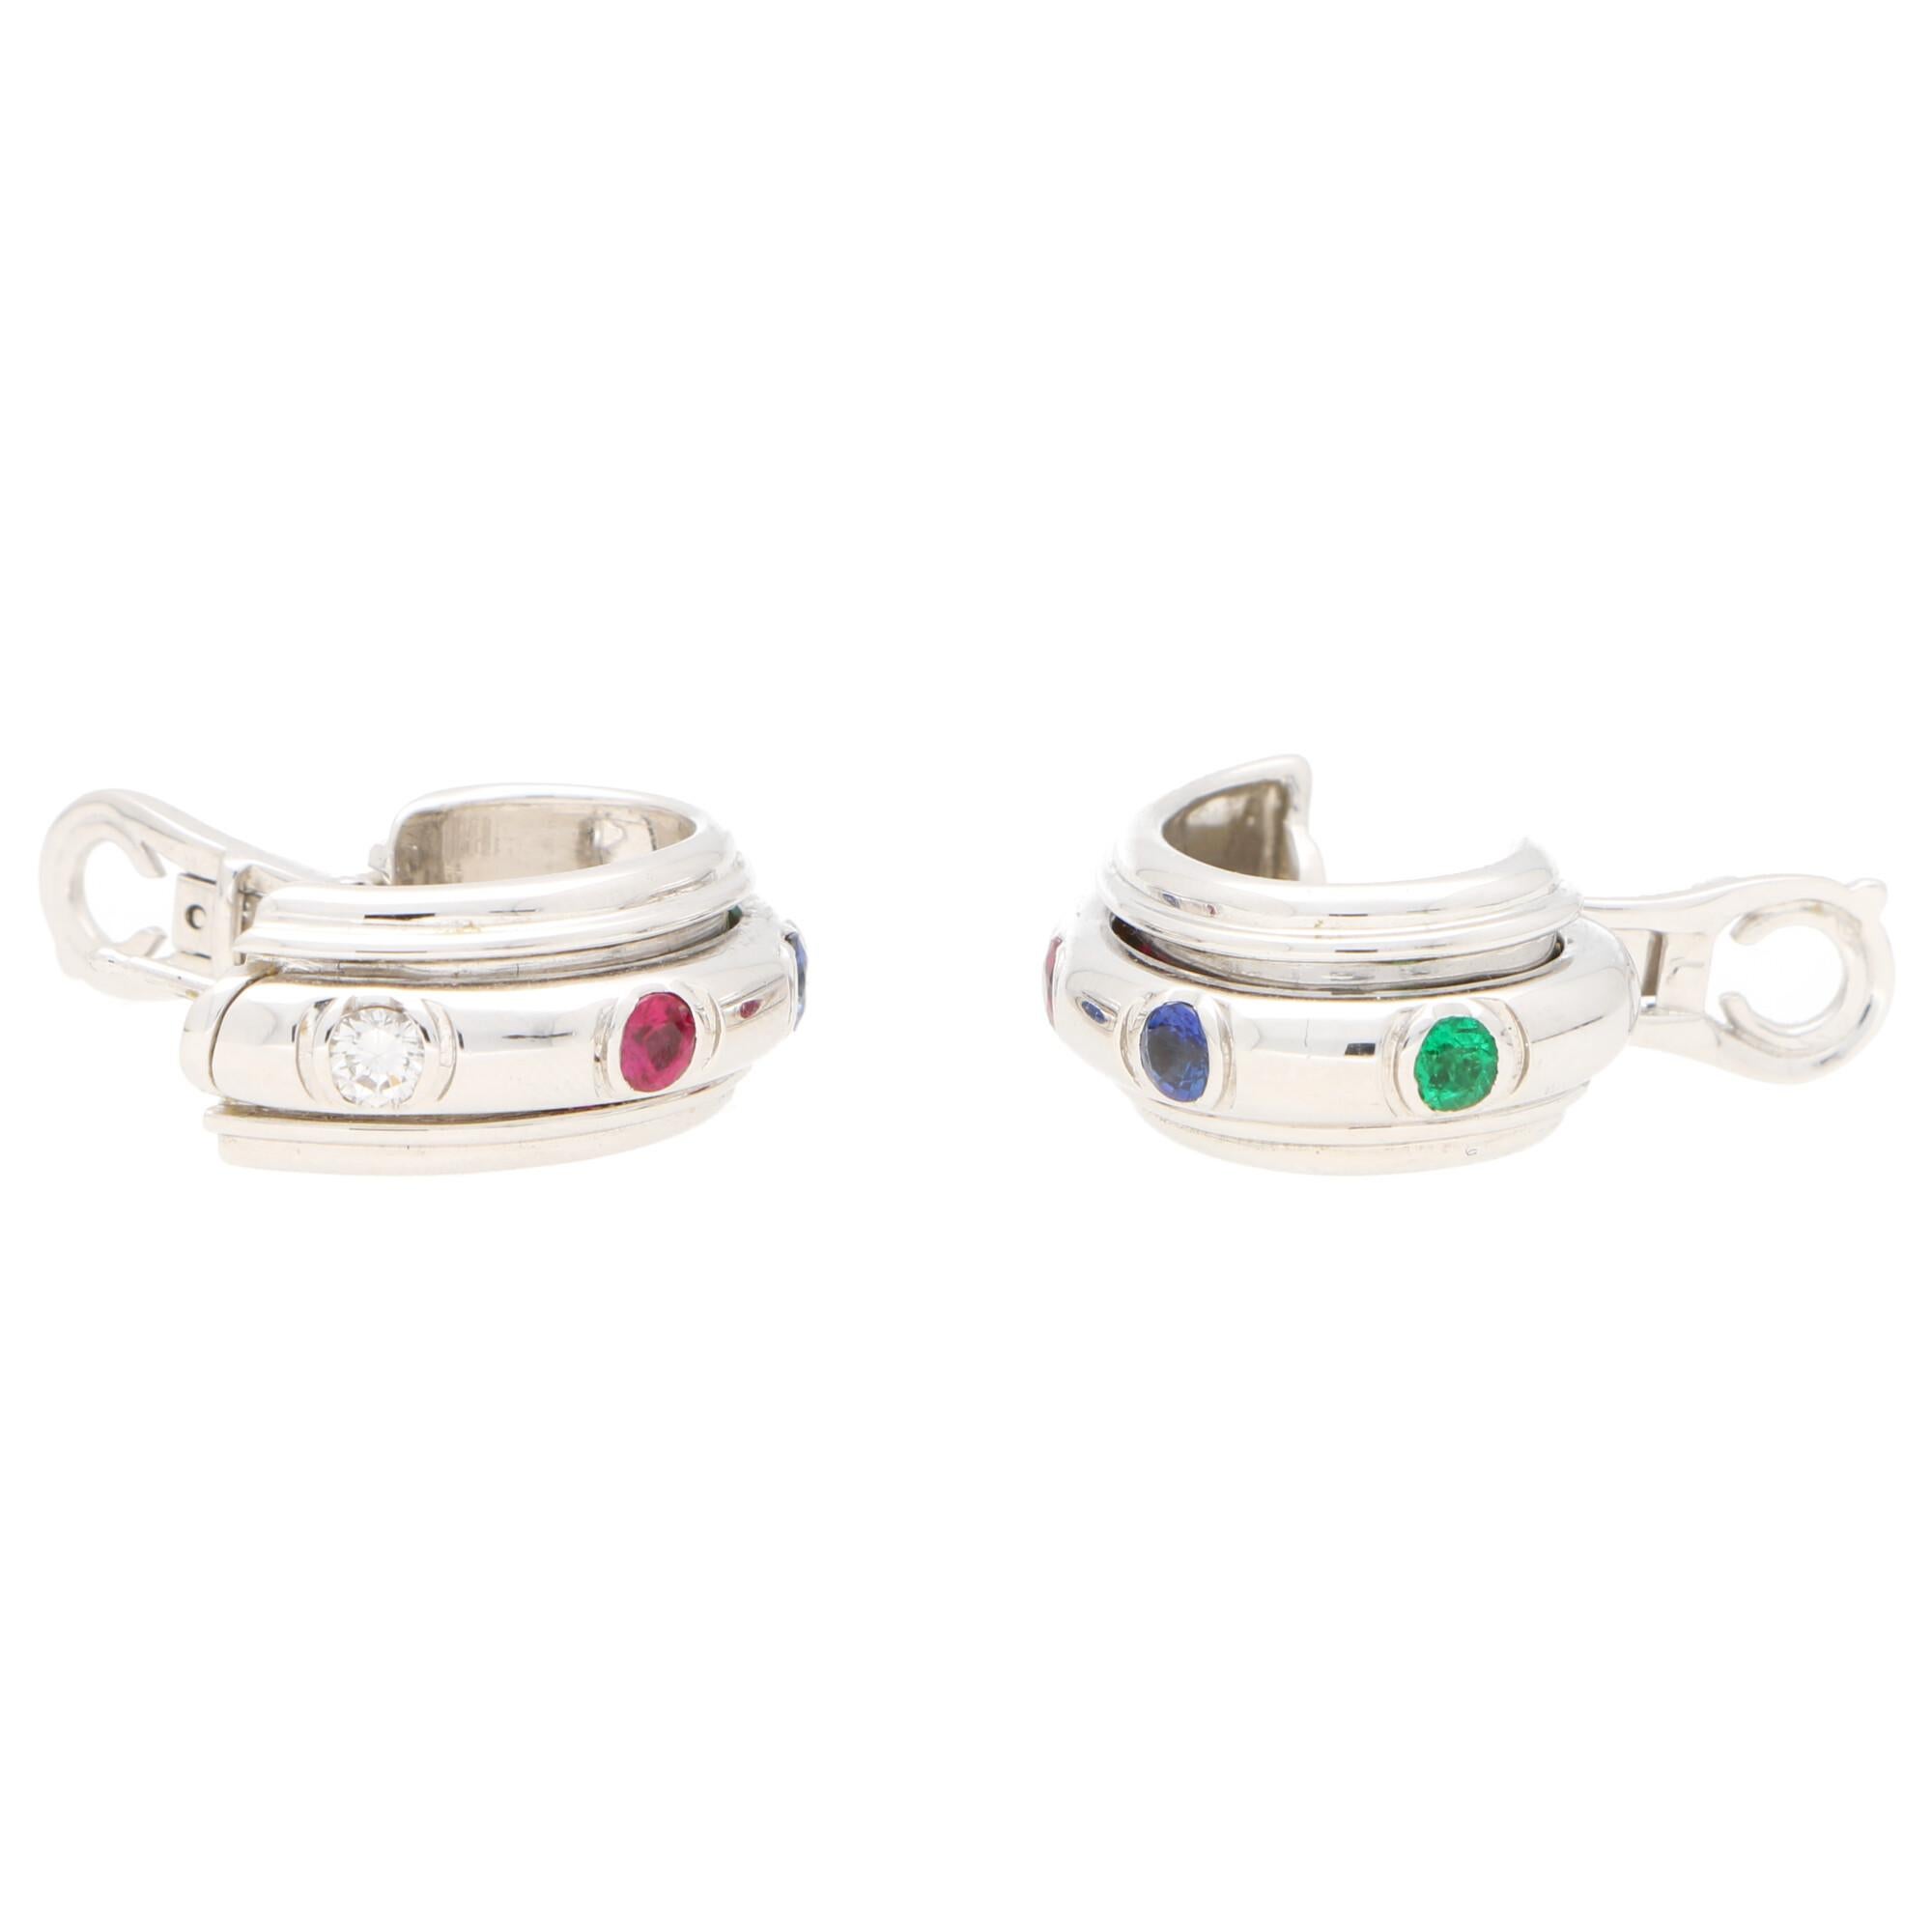 Retro Piaget Possession Diamond, Ruby, Emerald and Sapphire Earrings in 18k White Gold